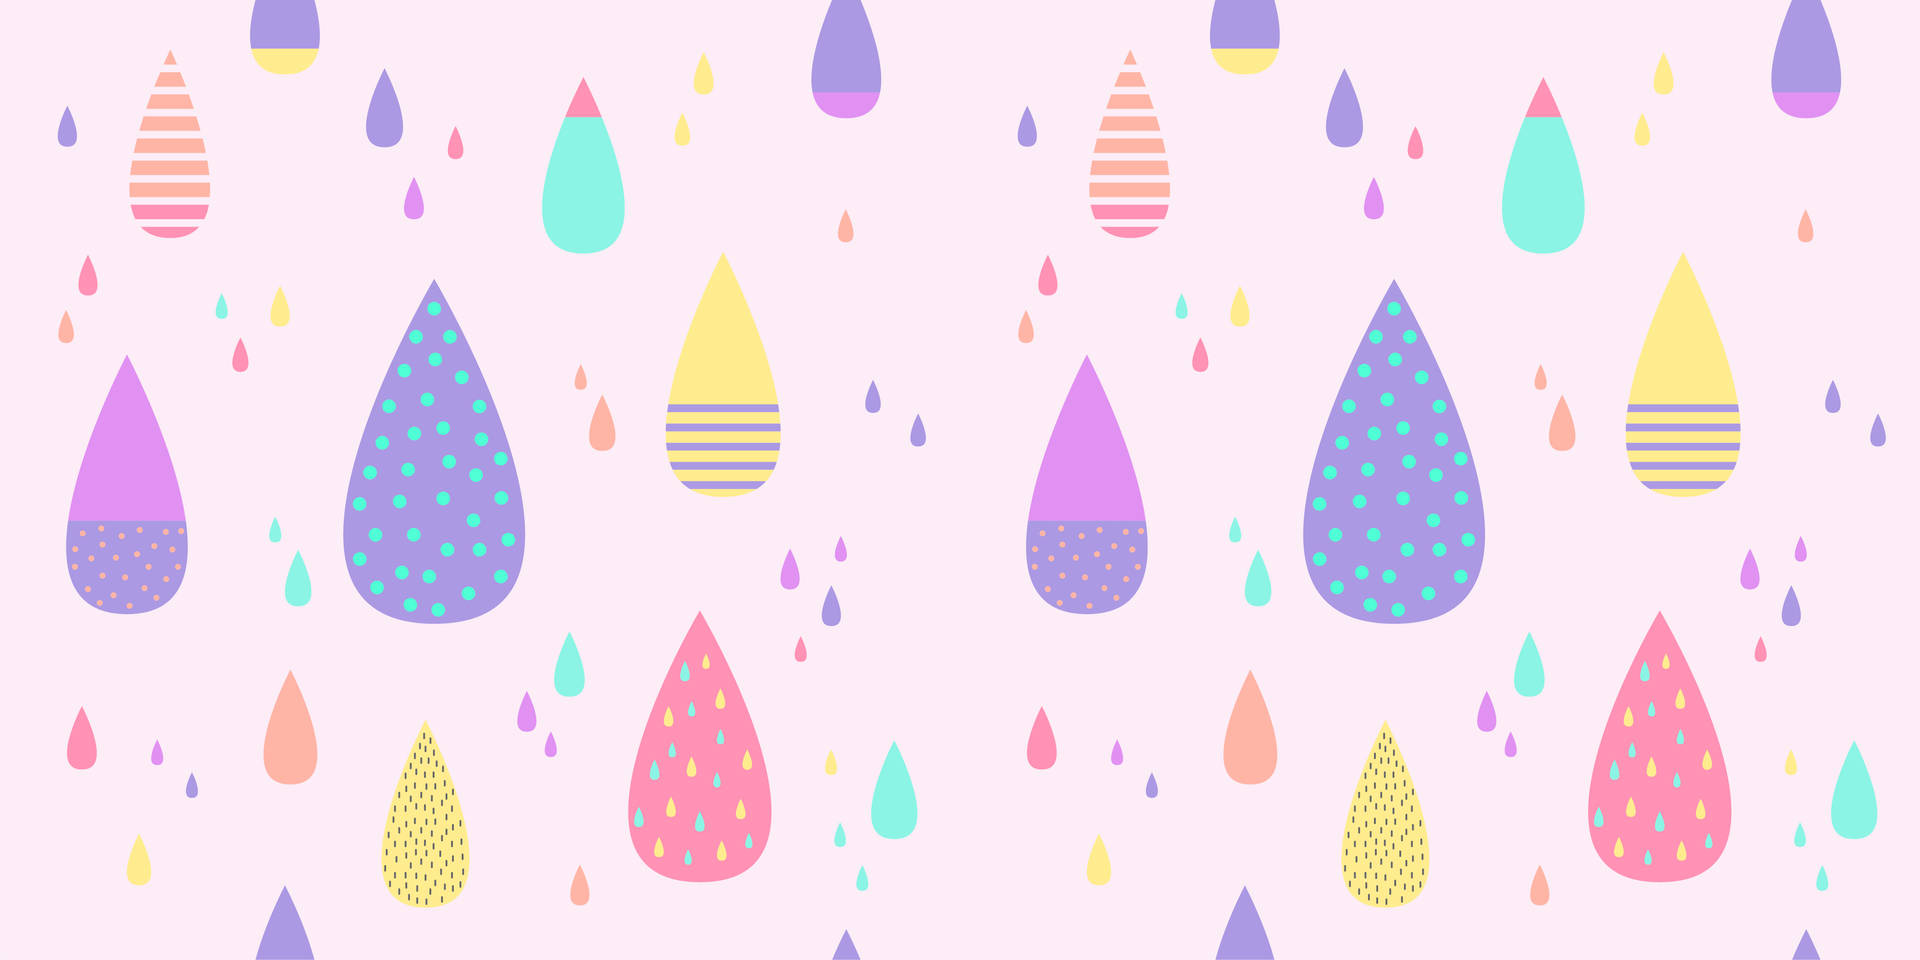 Colorful Tears Inspired Art Design Background